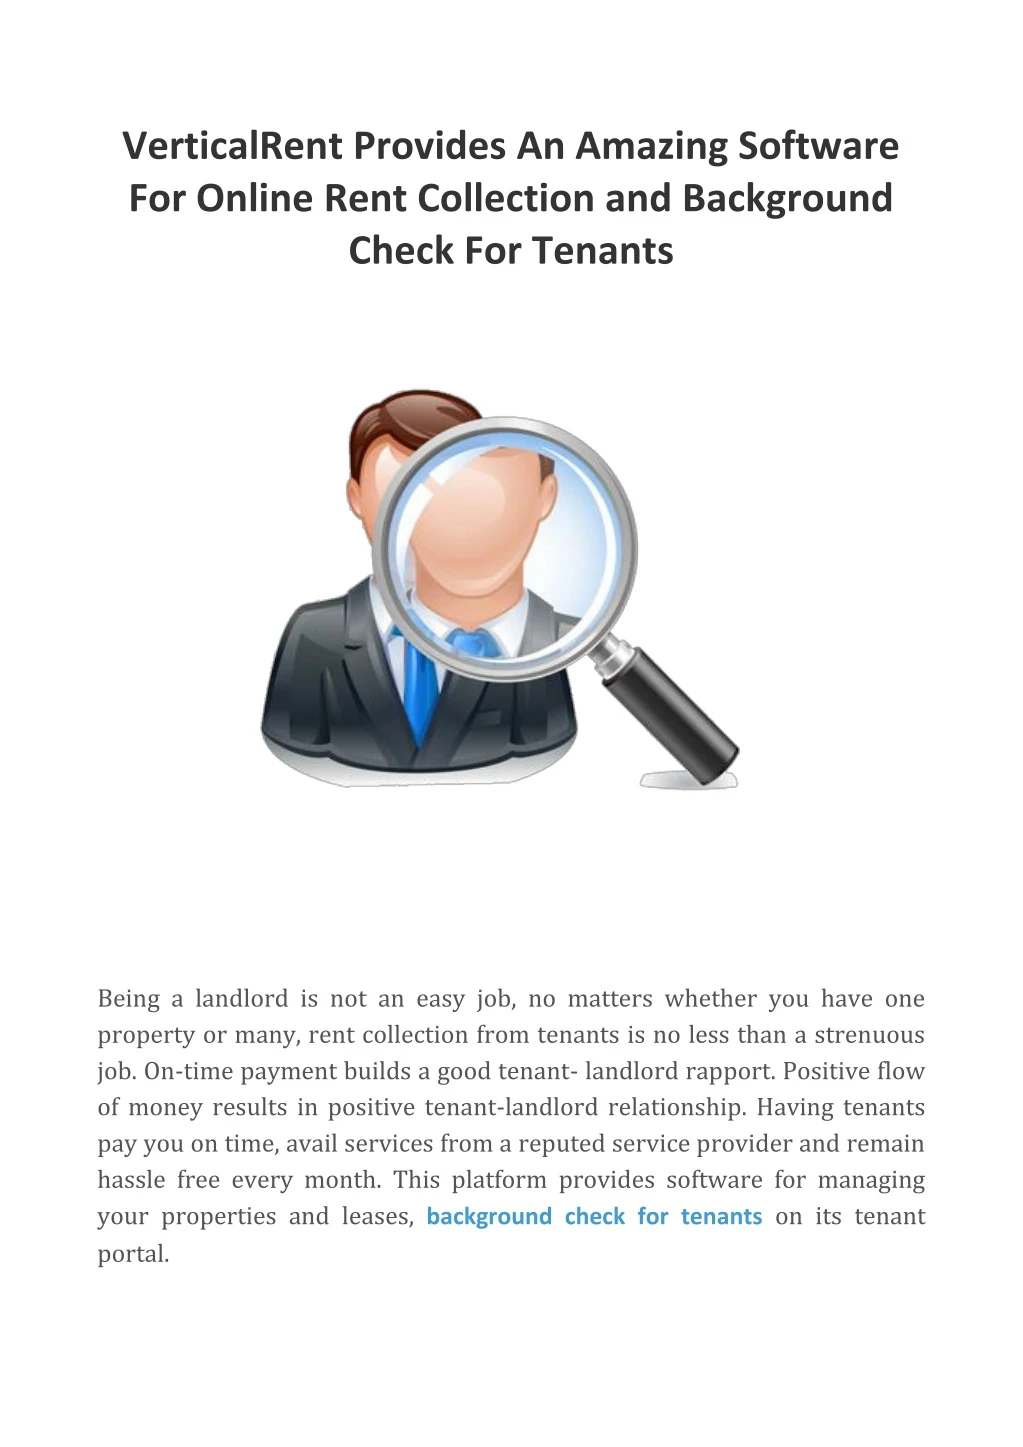 verticalrent provides an amazing software